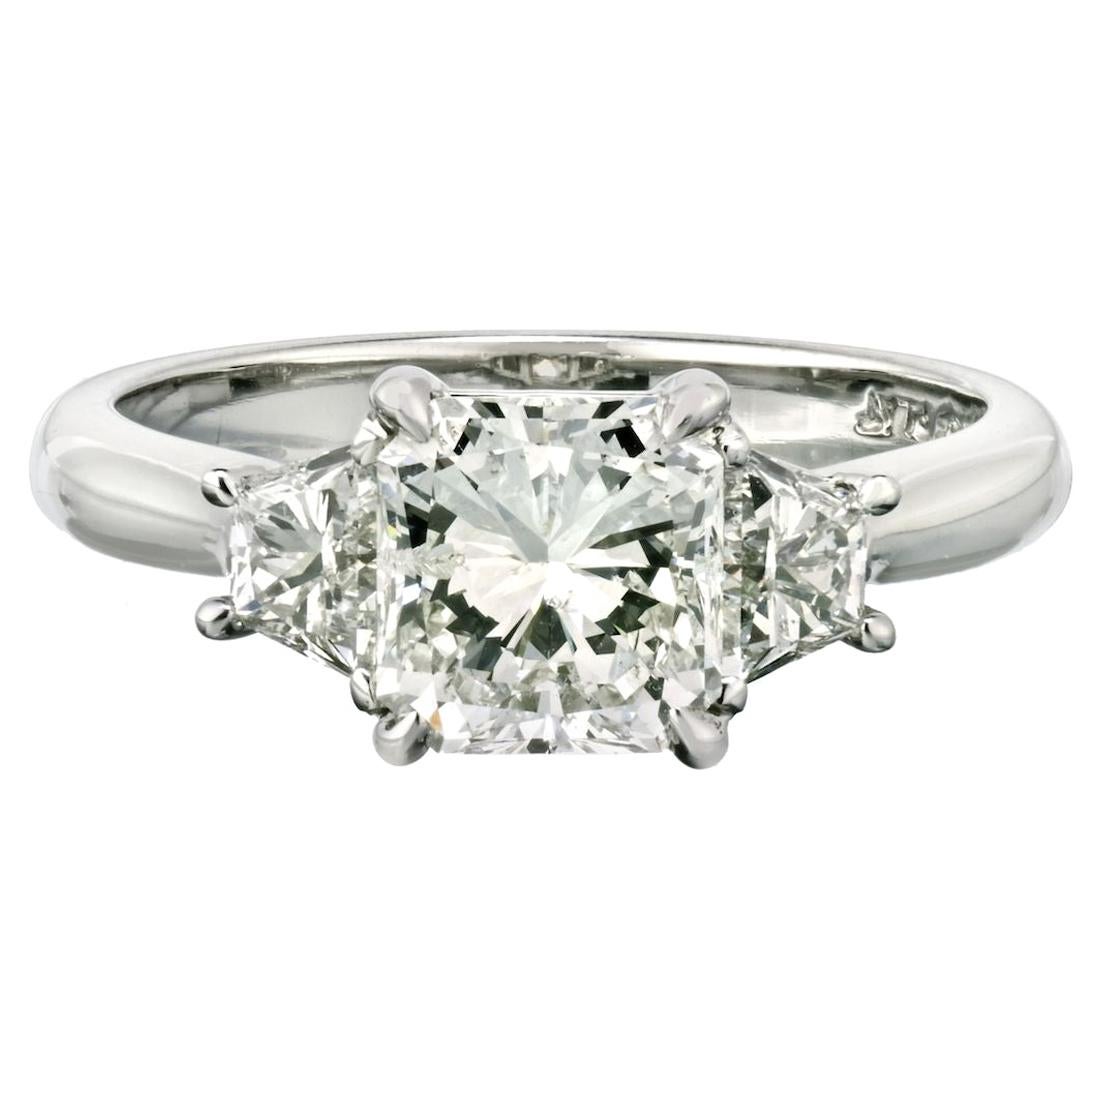 1.50 Carat Radiant Cut Diamond H/SI2 GIA Three-Stone Engagement Ring For Sale